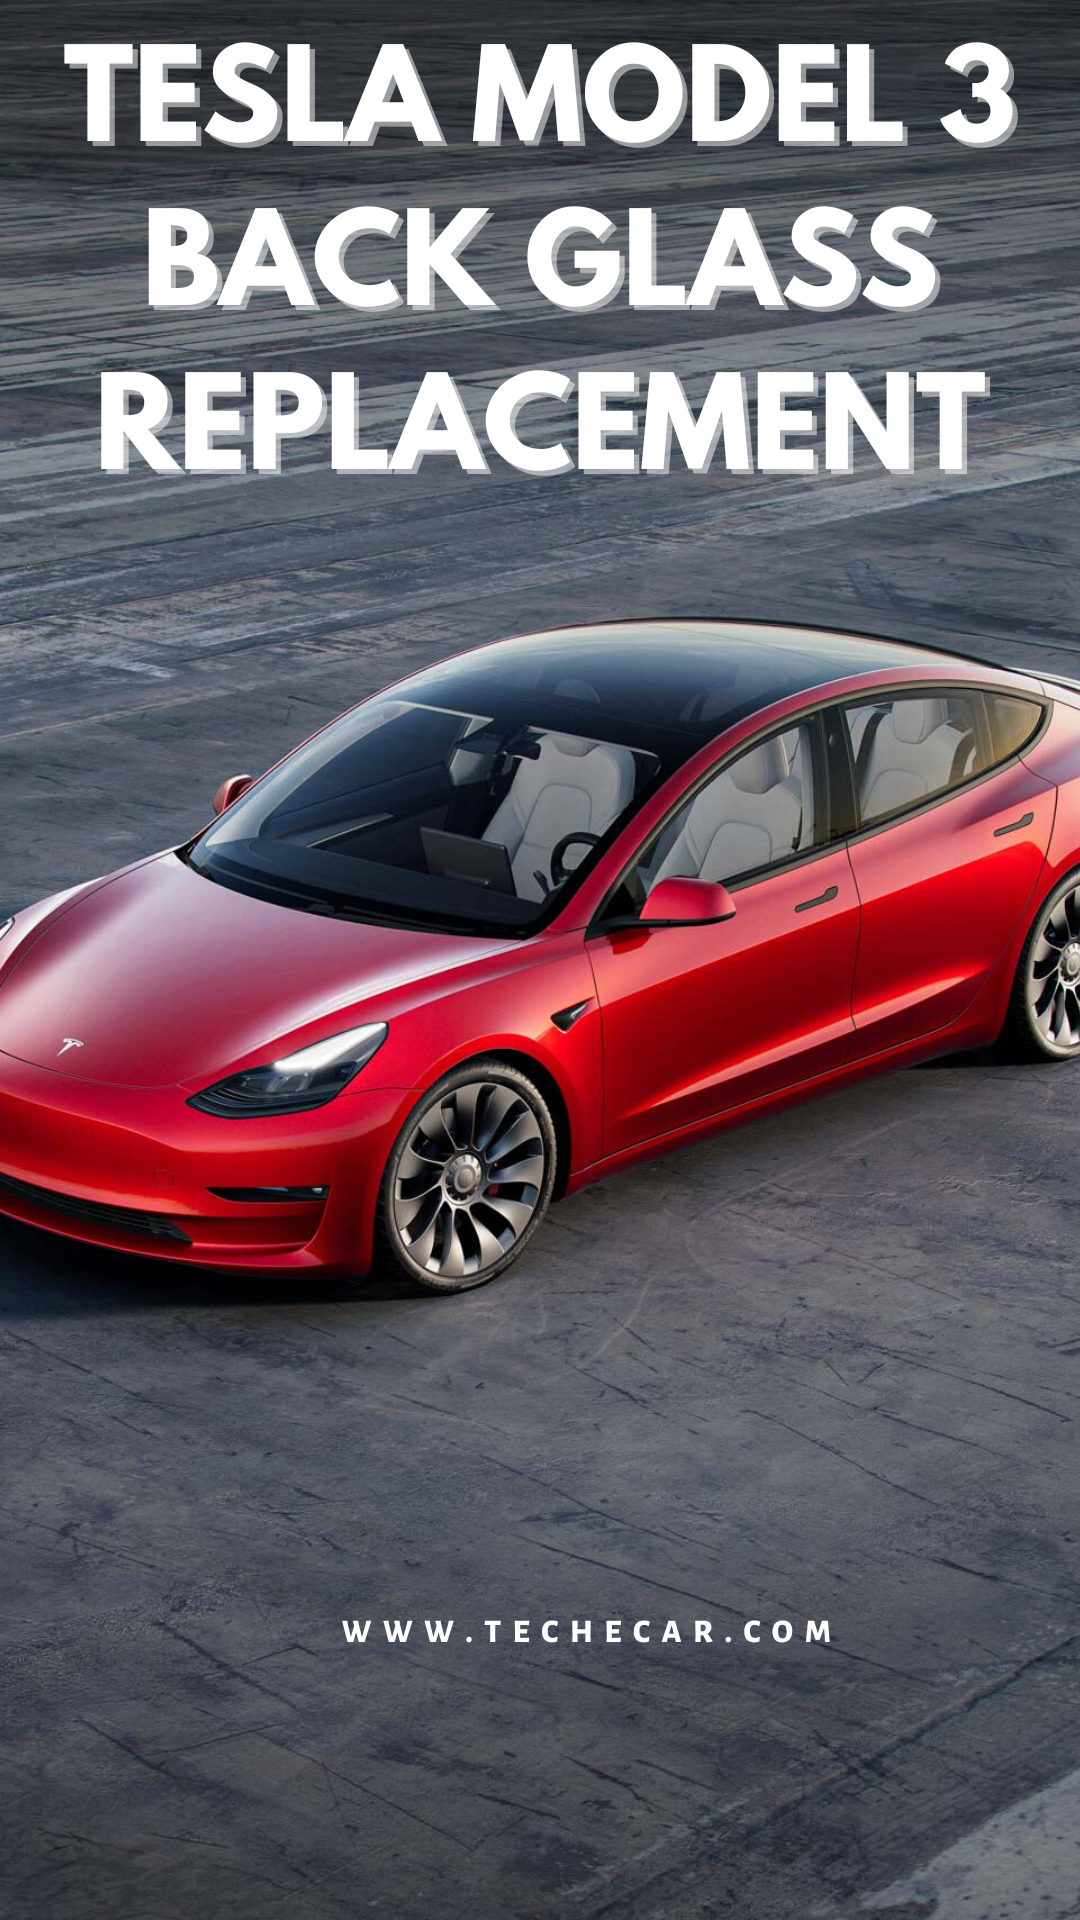 Tesla Model 3 Back Glass Replacement